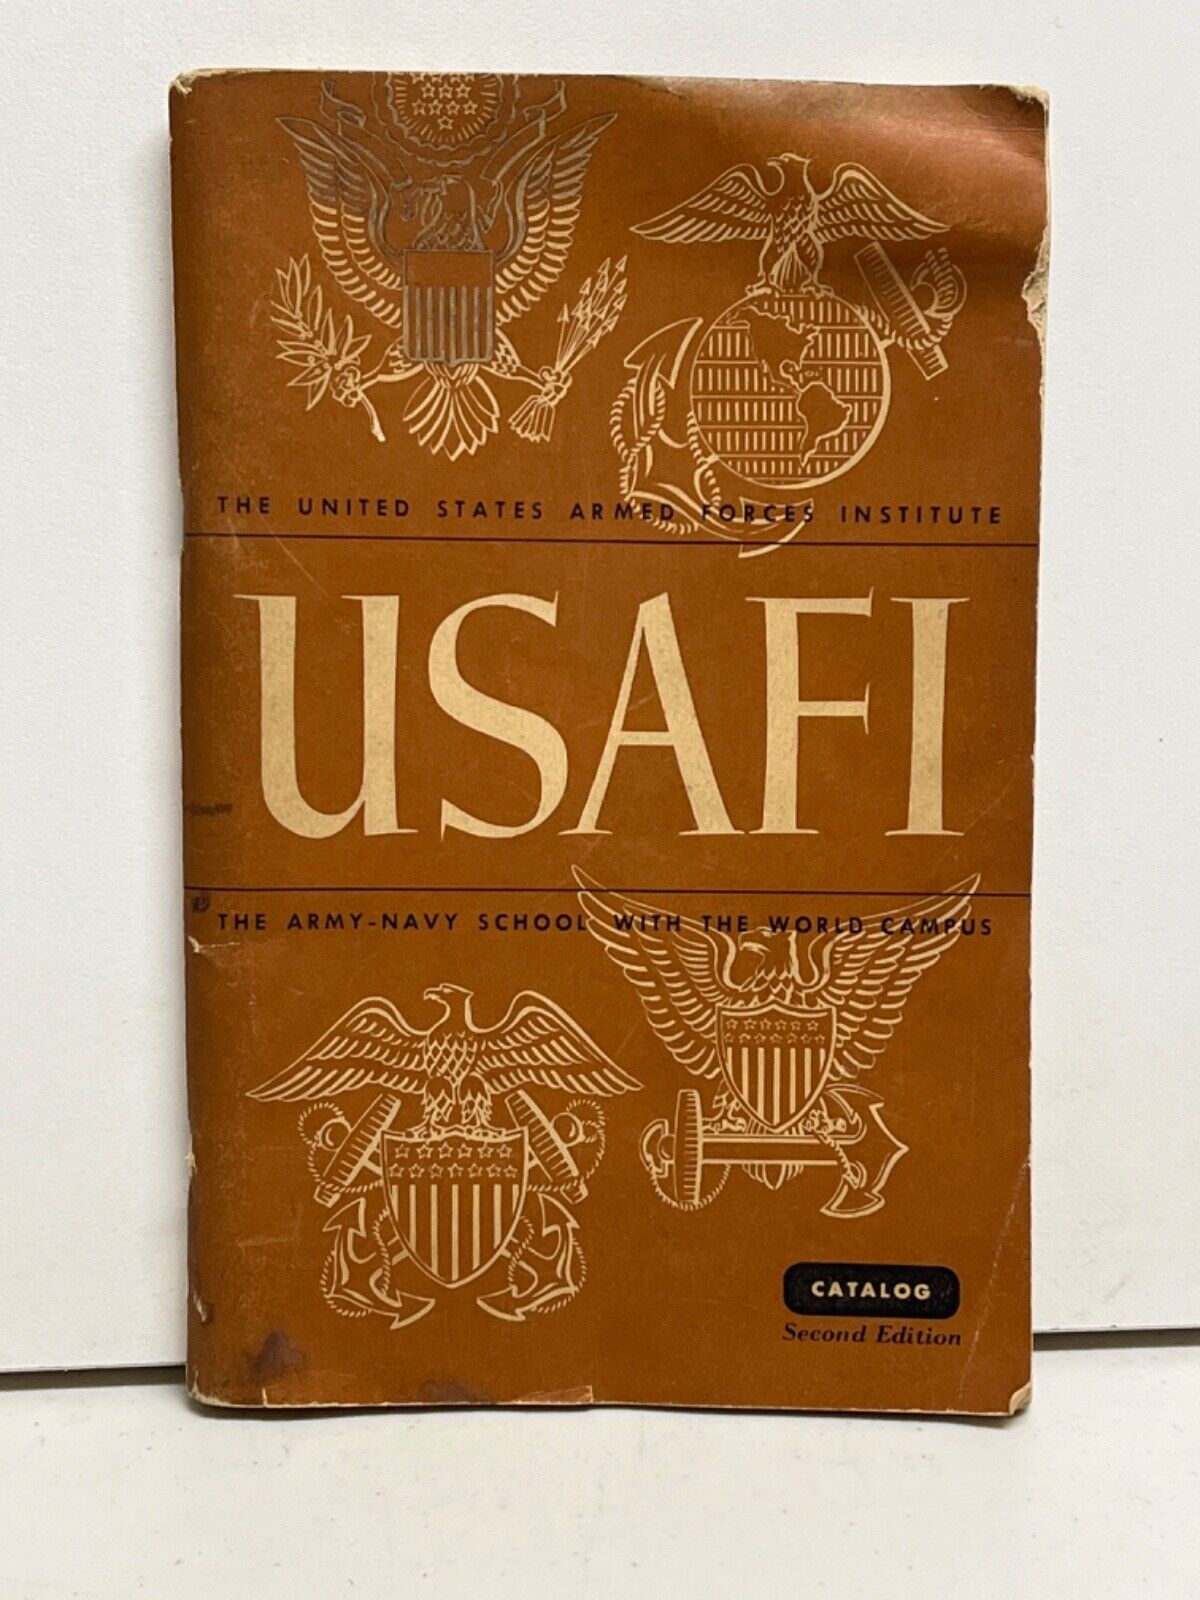 1944 The United States Armed Forces Institute Catalog Second Edition